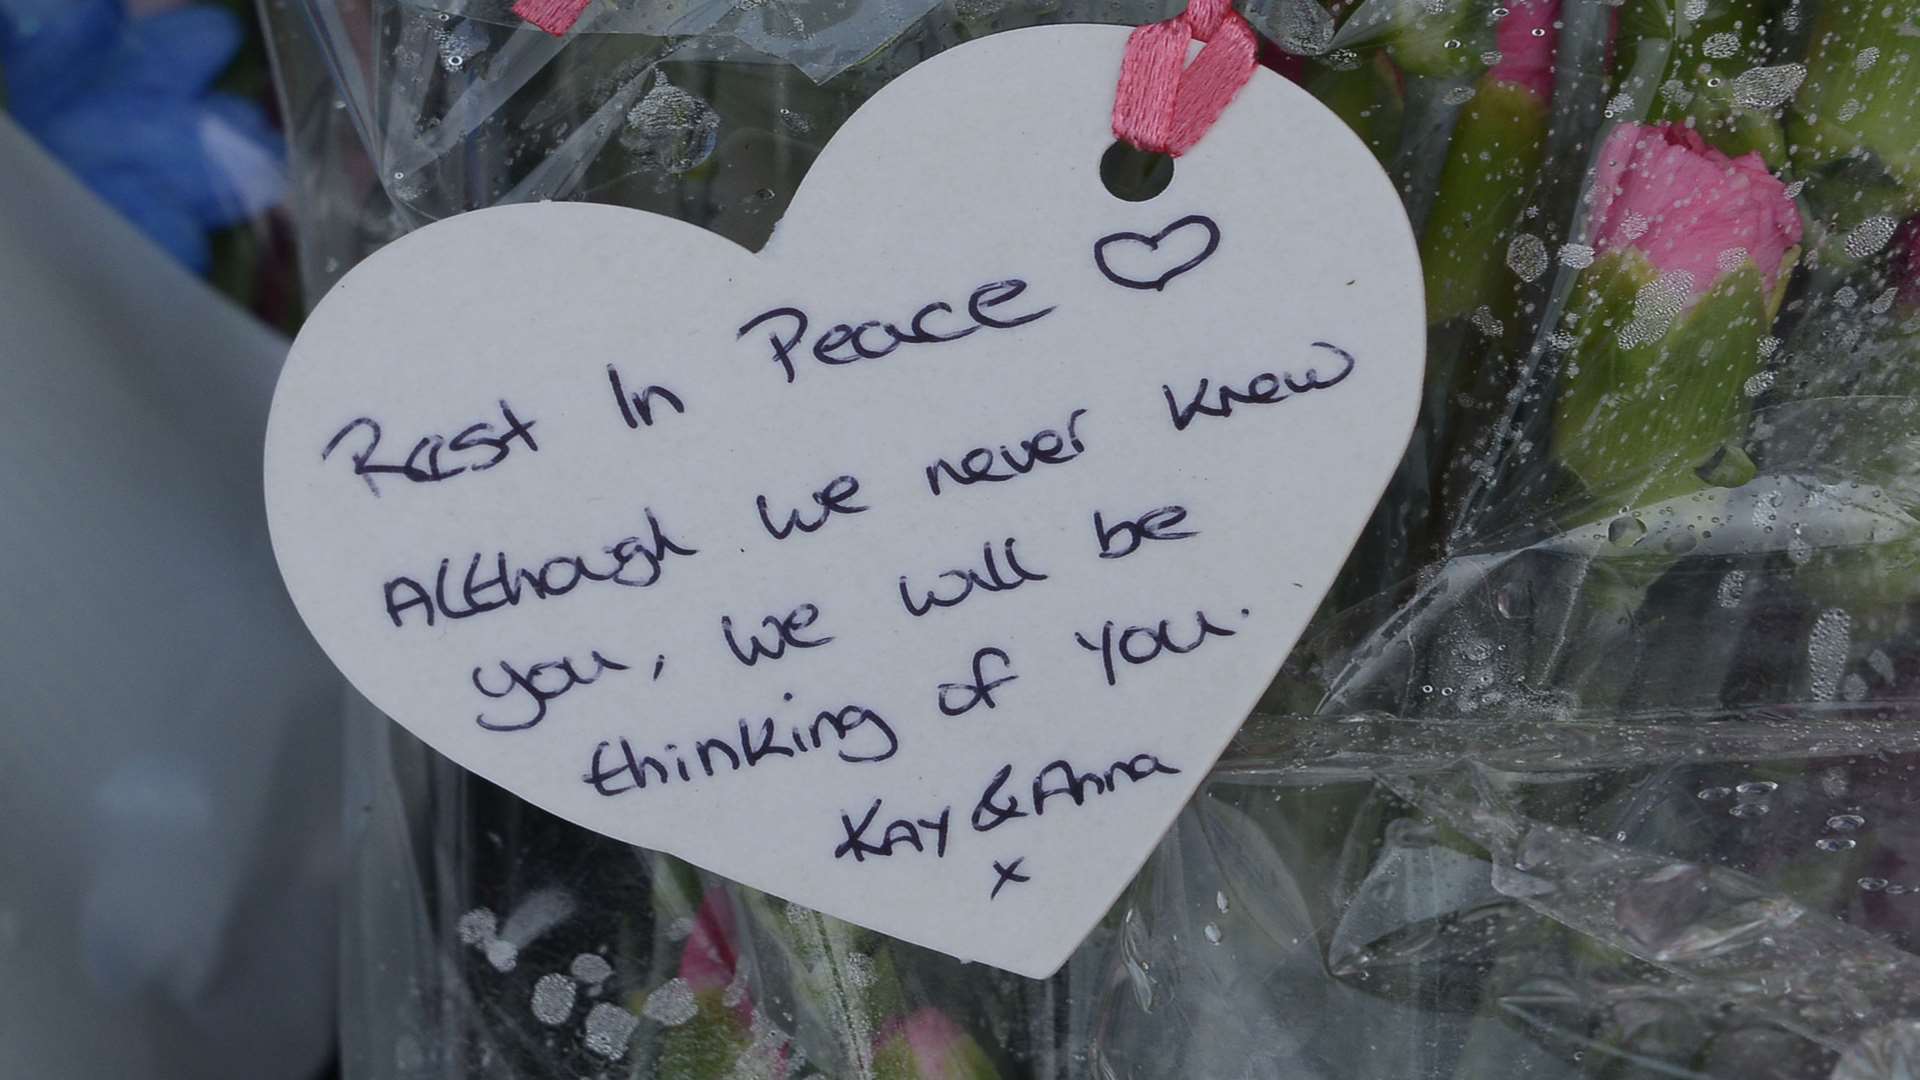 Floral tributes and messages left on the pavement for teenager Luna Barros